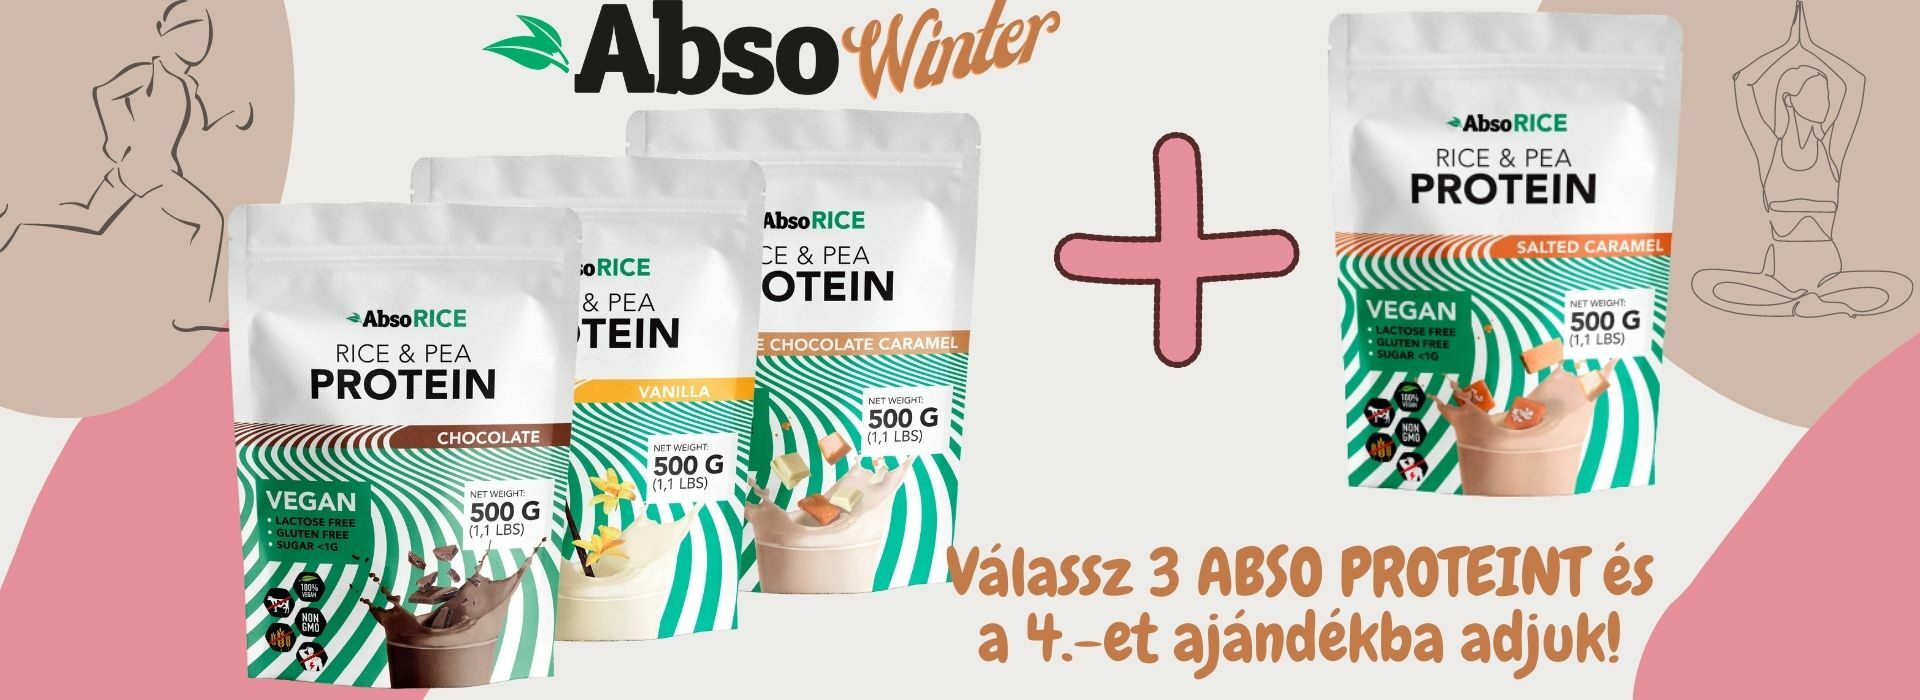 absowintersale